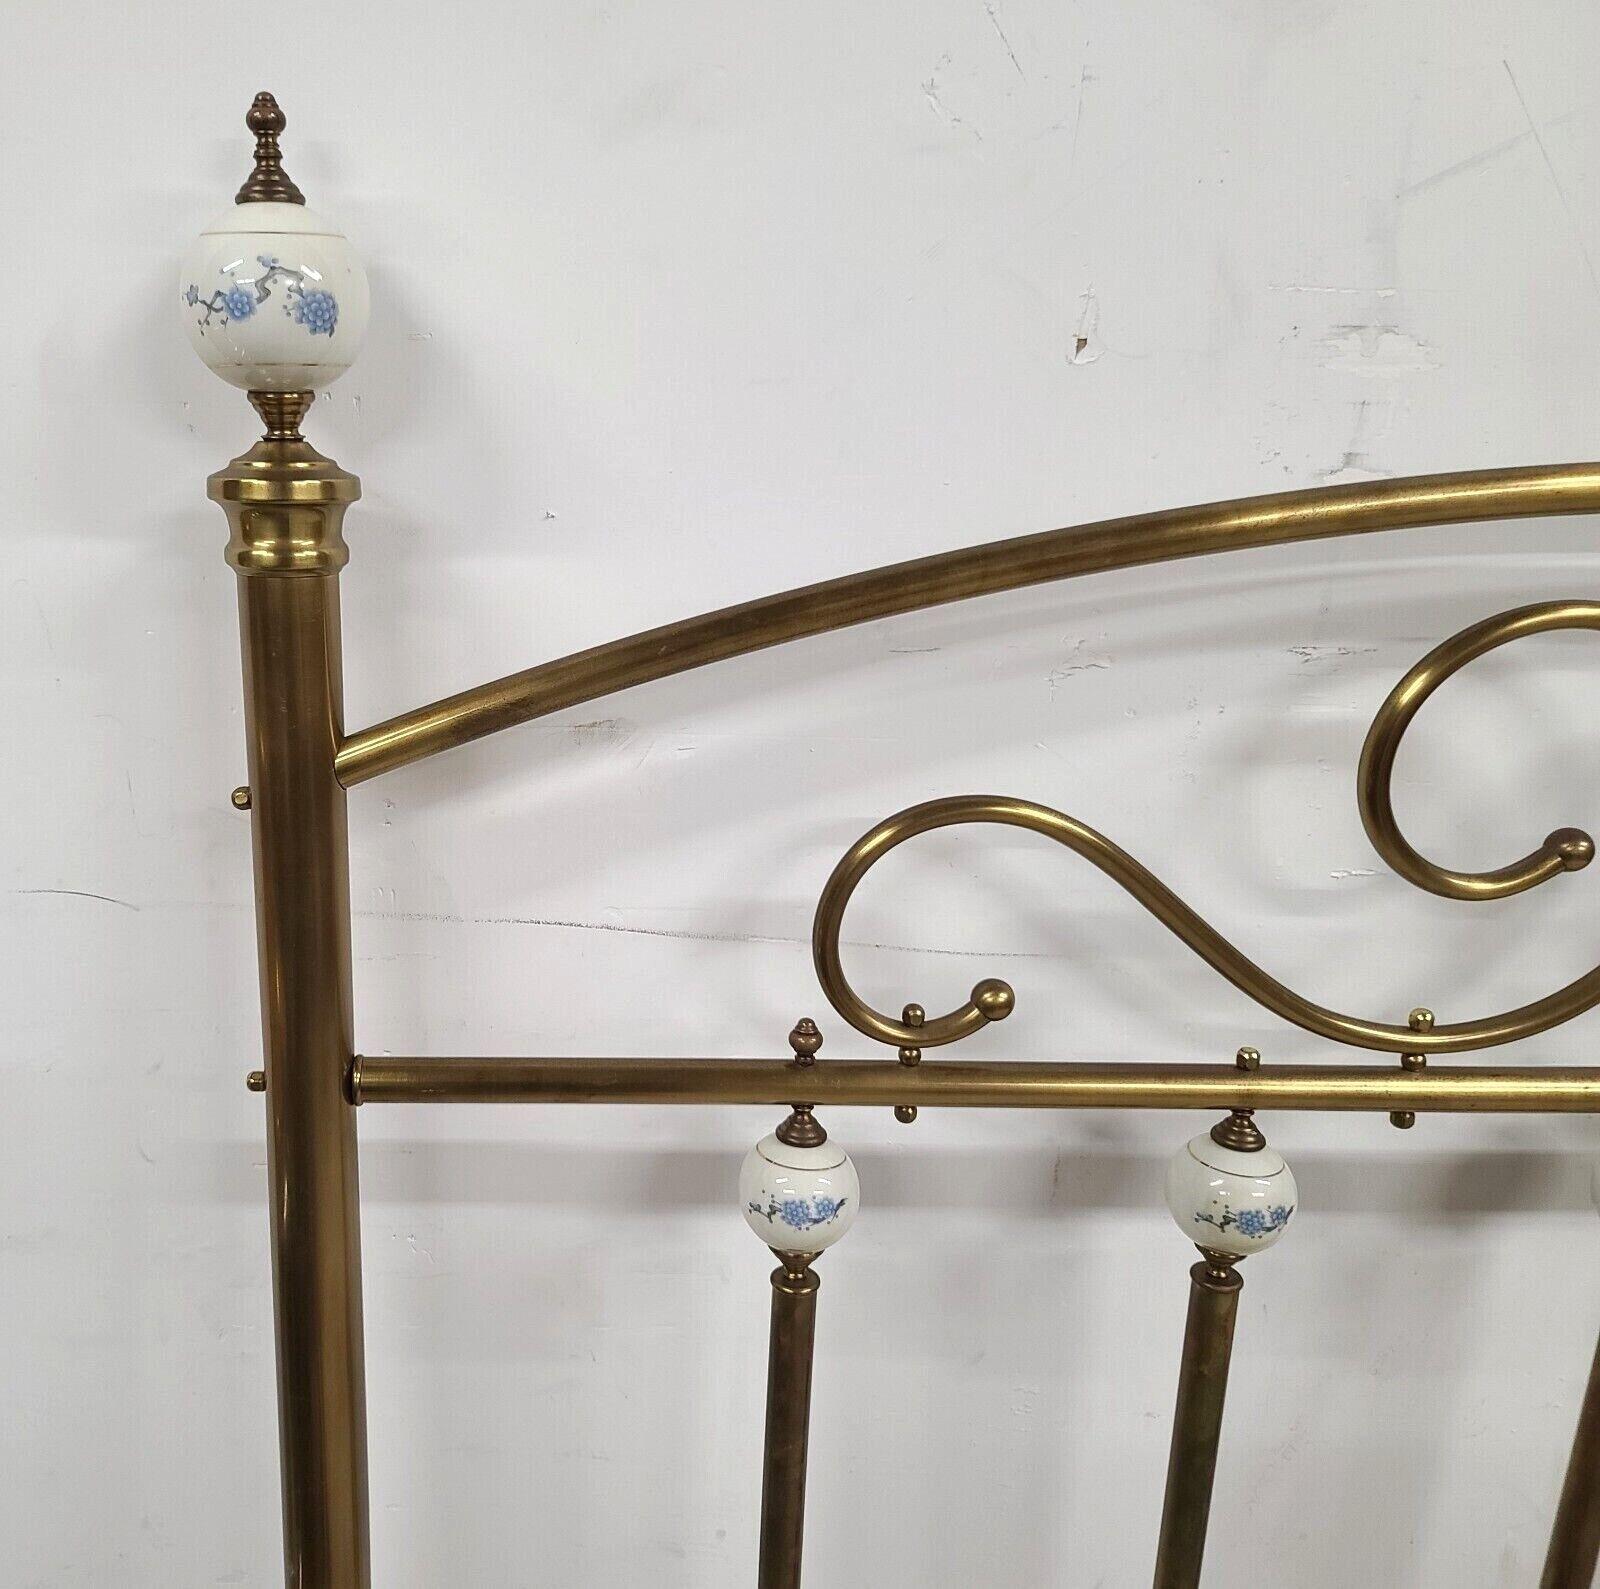 brass bed with porcelain knobs